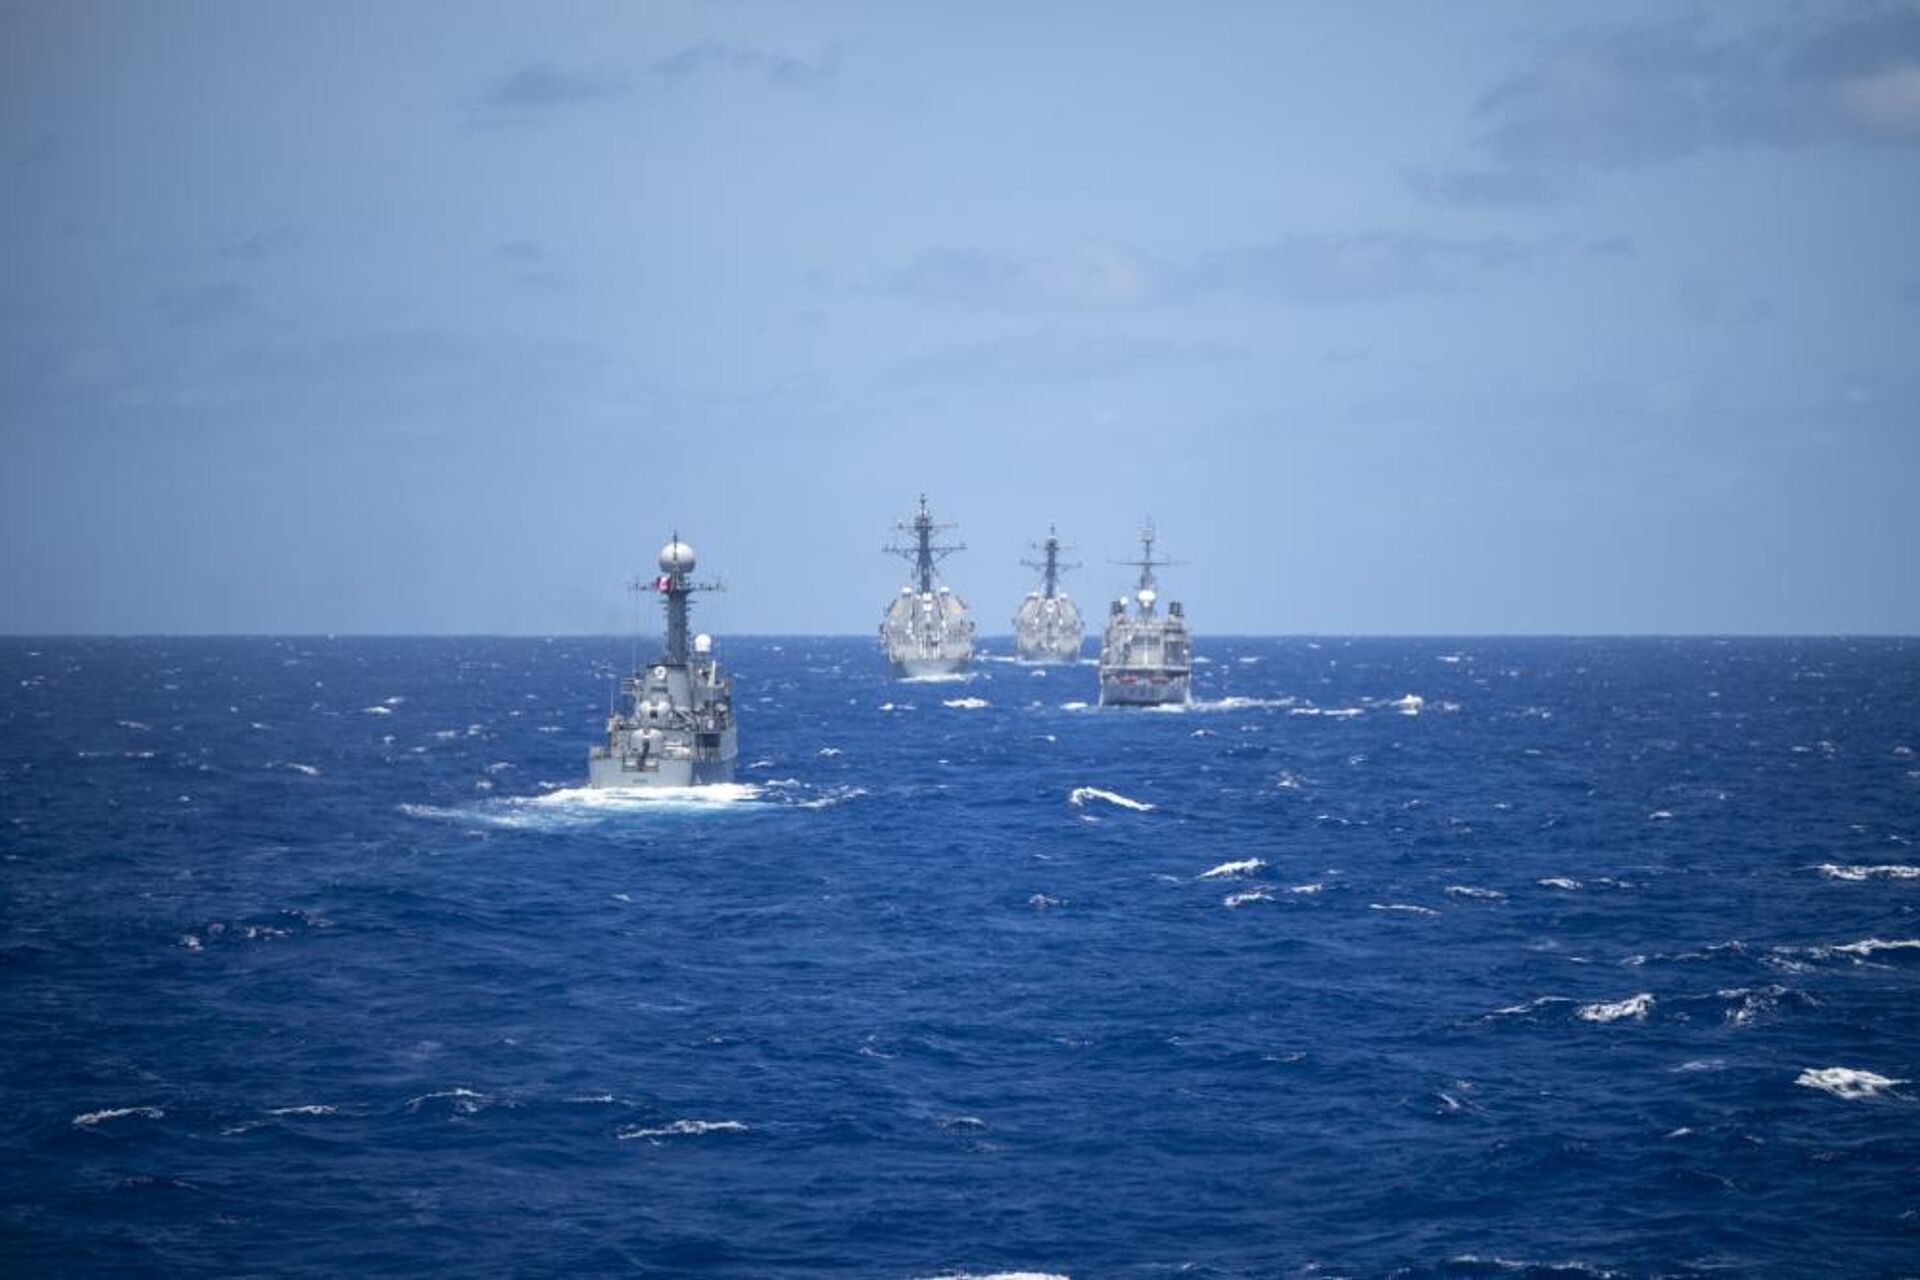 Peruvian Navy corvette BAP Guise (CC-28), French Navy frigate FS Prairial (F731), Arleigh Burke-class guided-missile destroyer USS Chafee (DDG 90) and the Arleigh Burke-class guided-missile destroyer USS Gridley (DDG 101) gather in formation in front of legend-class cutter USCGC Midgett (WMSL 757) during a ship maneuver exercise during Rim of the Pacific (RIMPAC) 2022.
 - Sputnik International, 1920, 18.07.2022